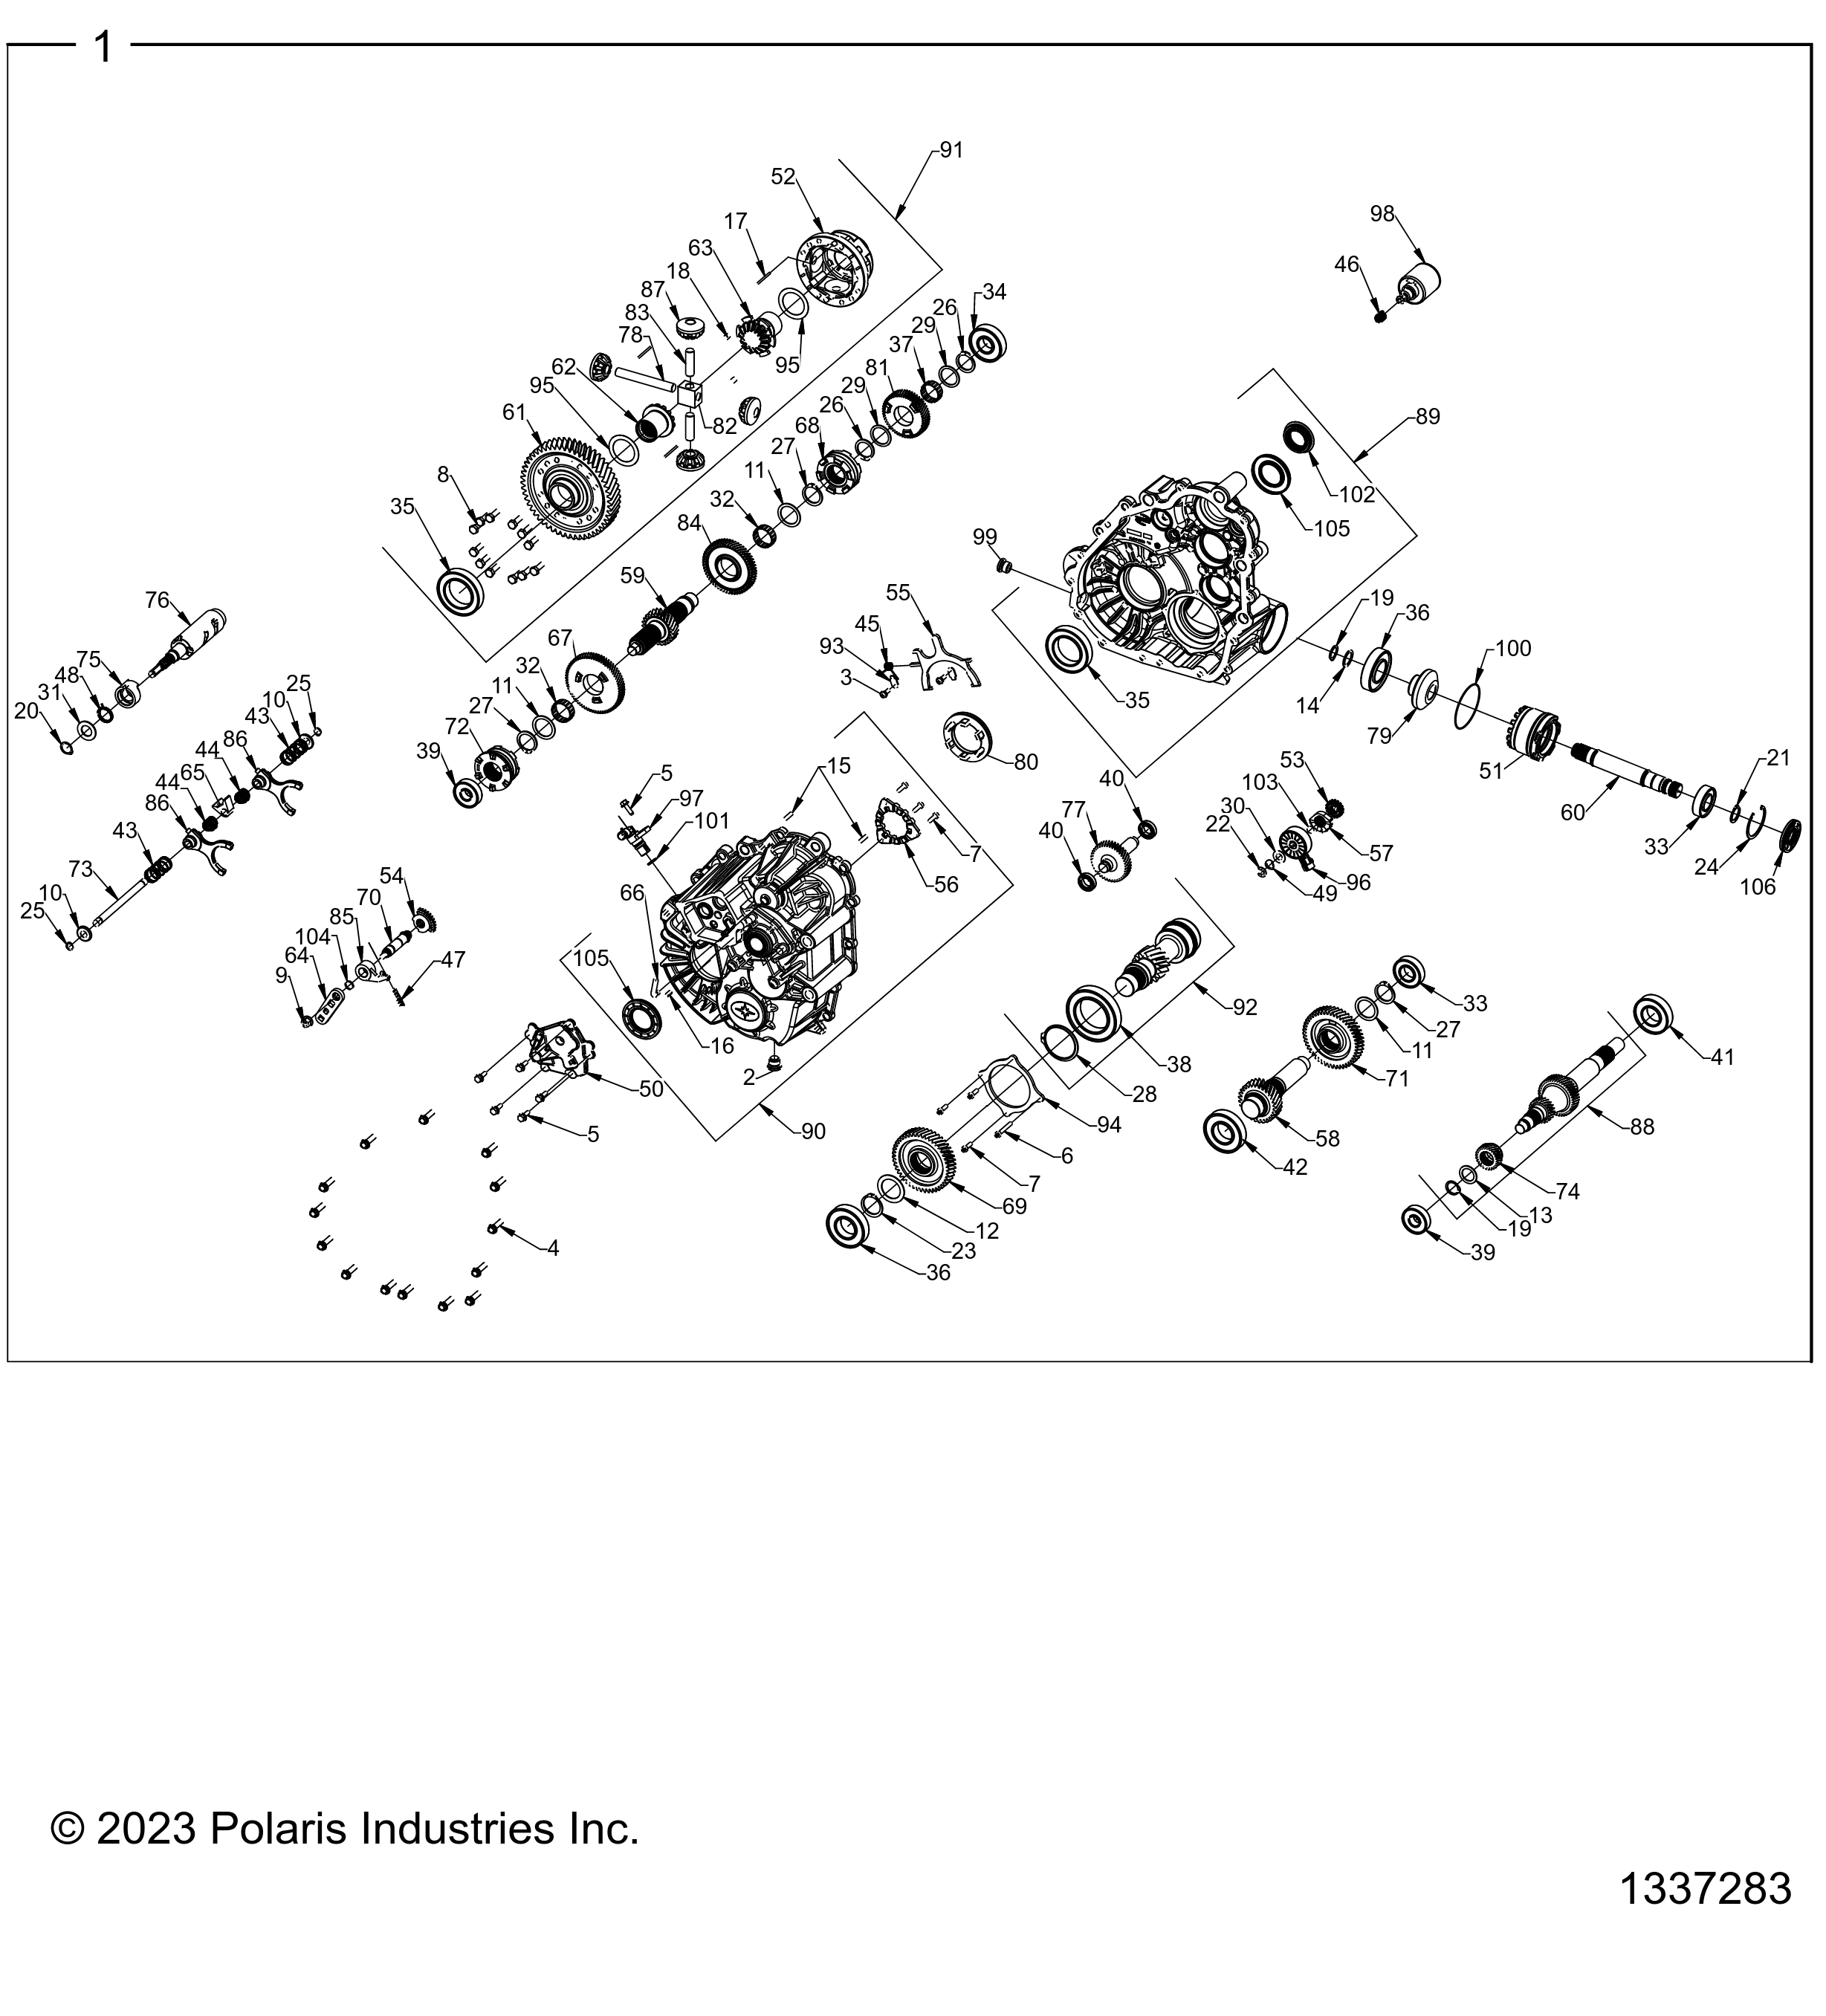 Part Number : 3239520 SUBASSEMBLY DIFFERENTIAL